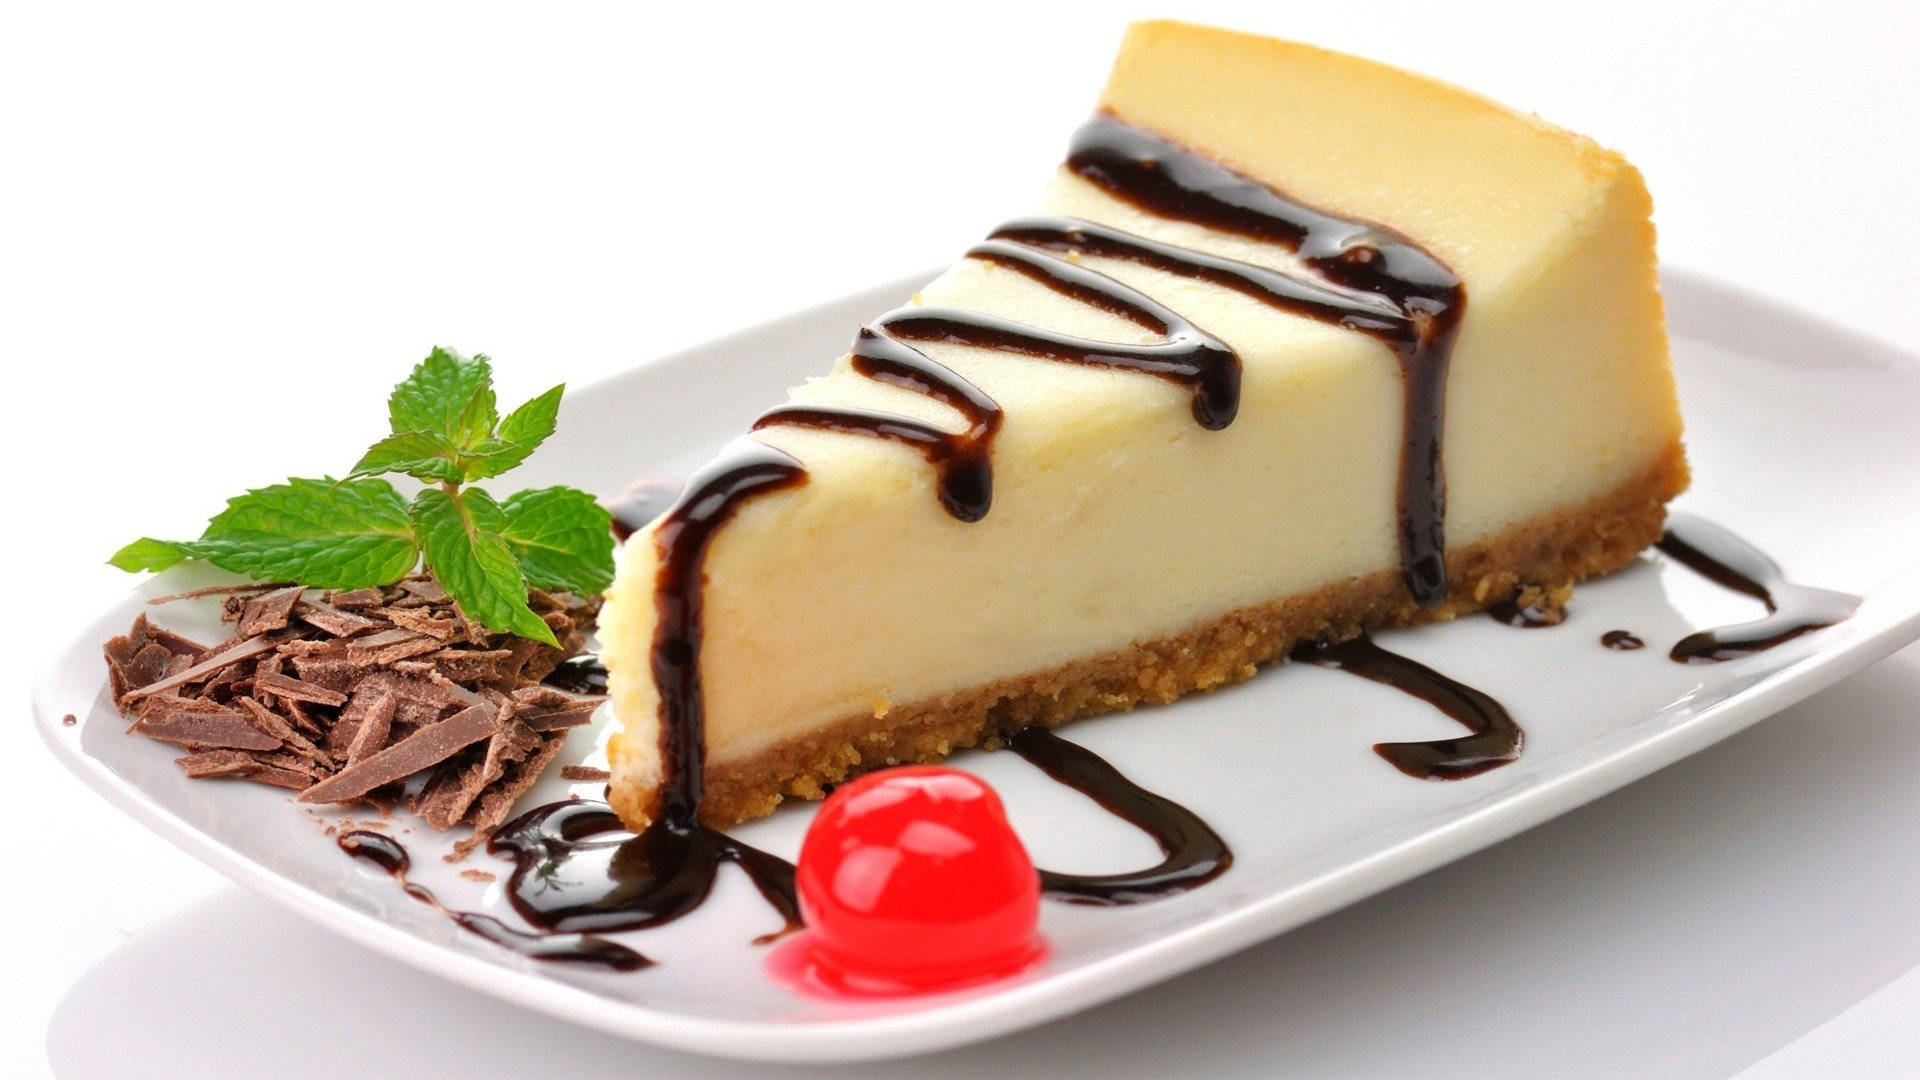 Cheesecake With Chocolate Syrup Dessert Wallpaper